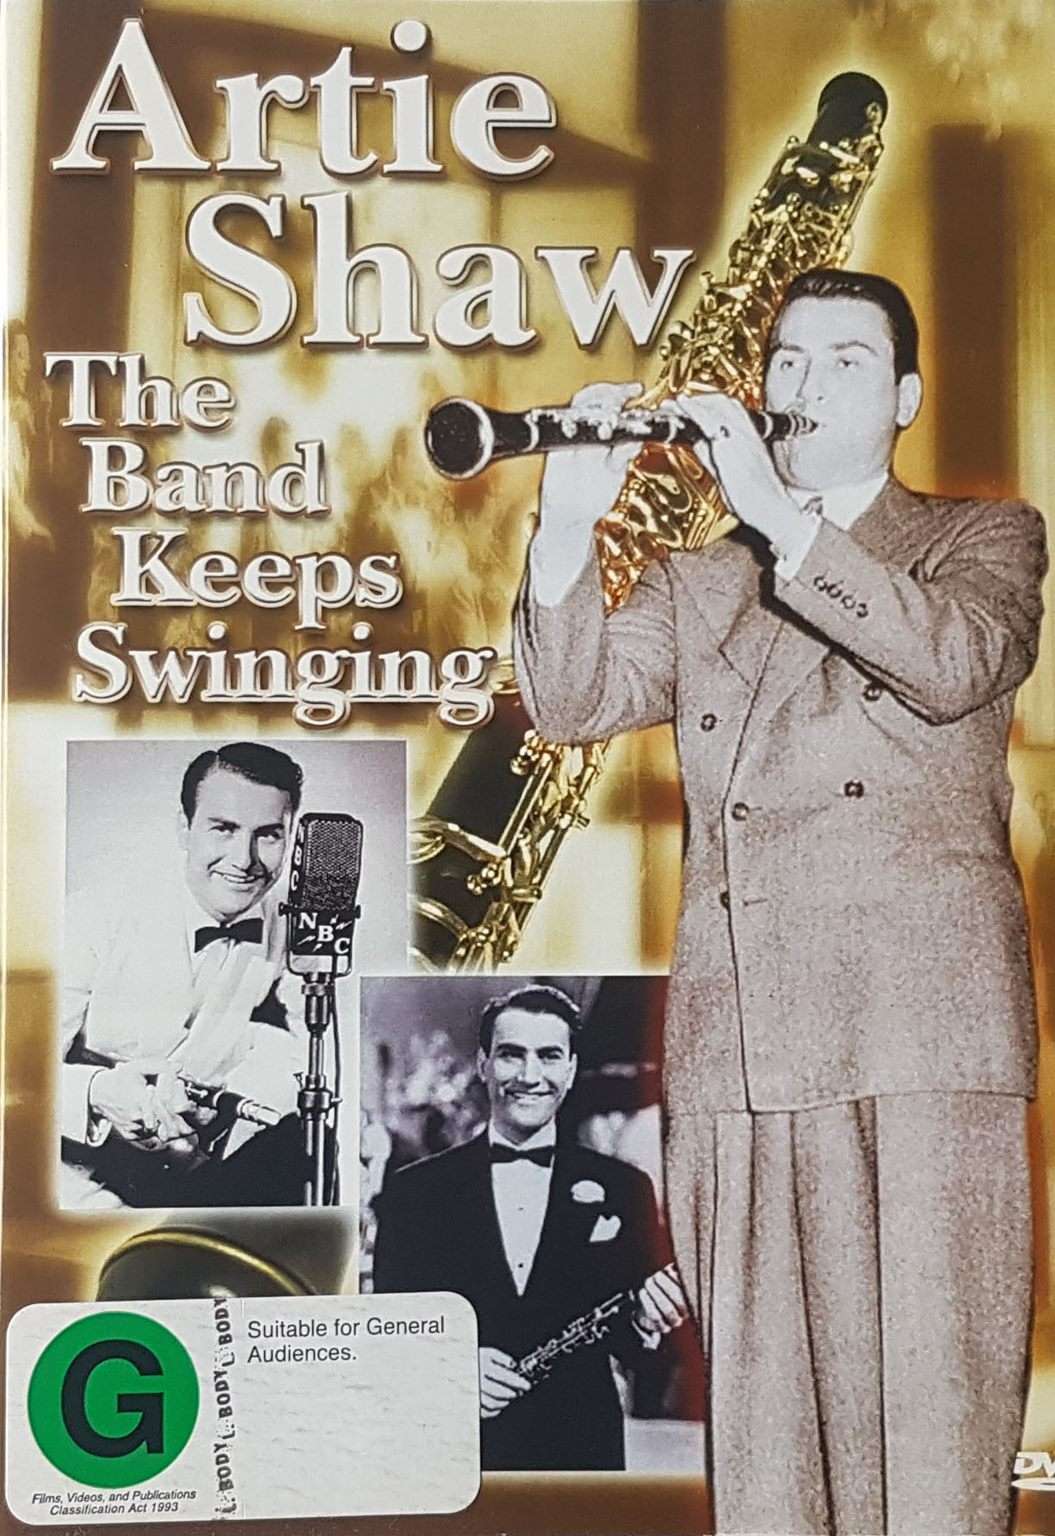 Artie Shaw: The Band Keeps Swinging